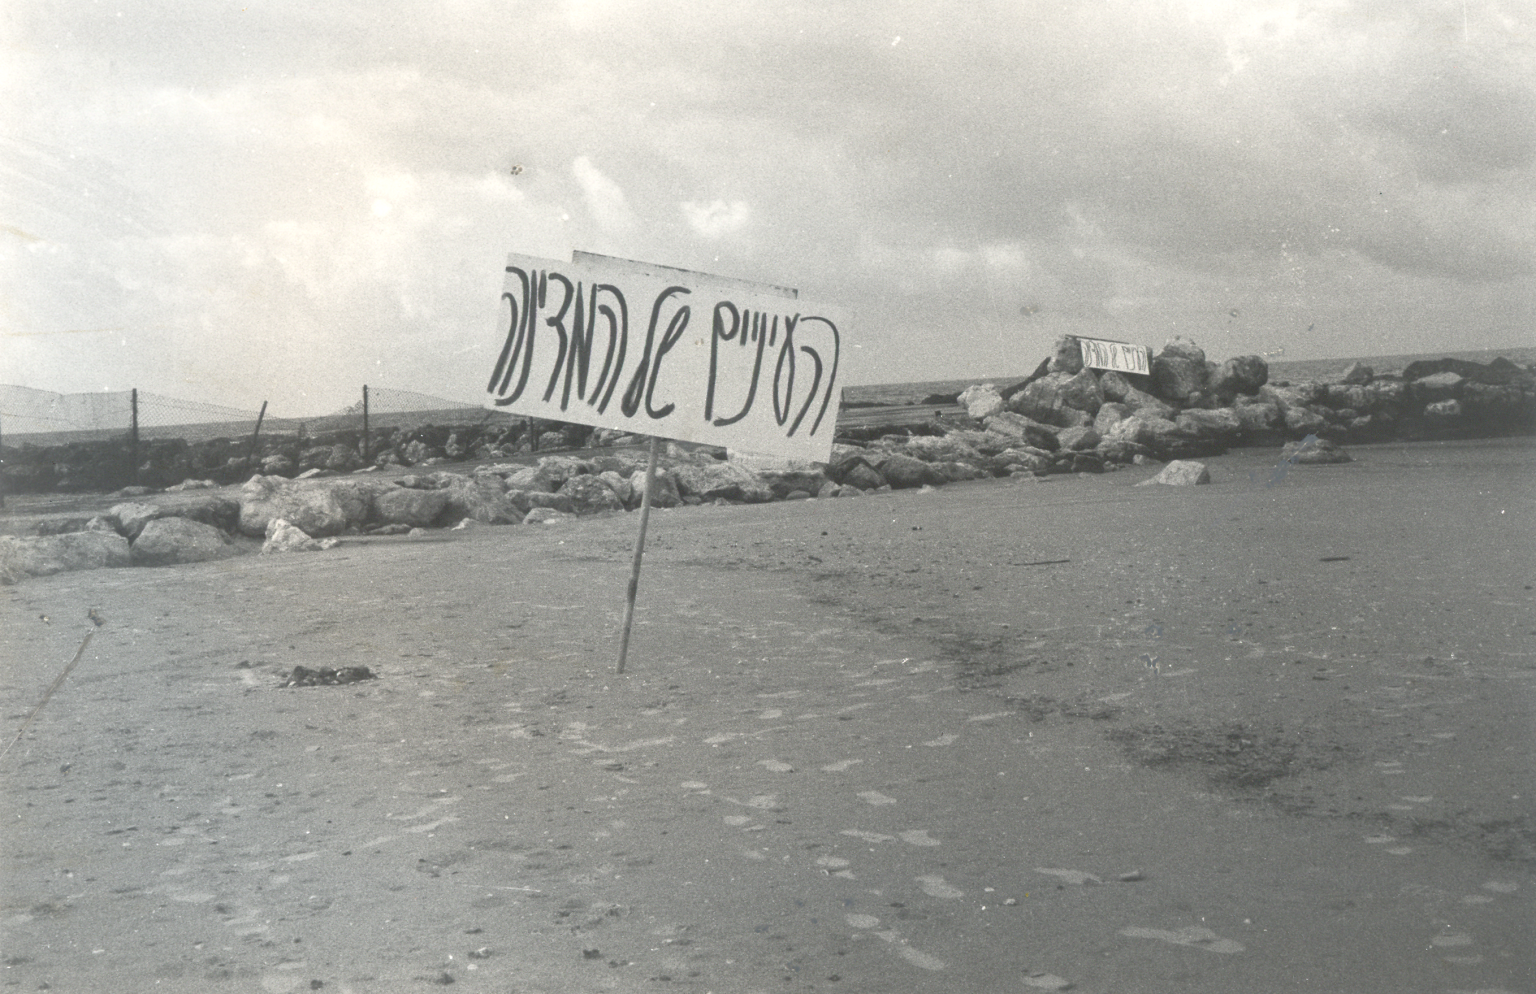 Photograph of Hebrew sign on empty beach with a rock jetty in background.